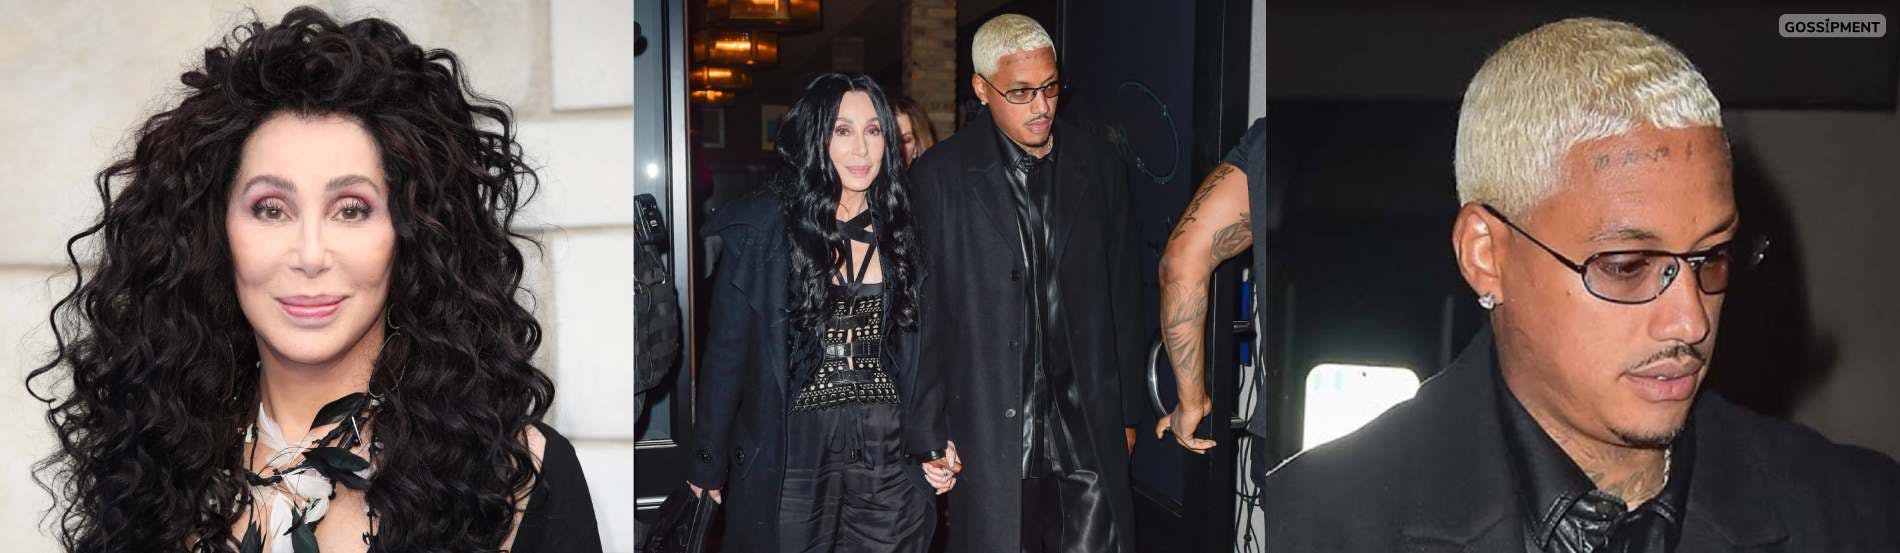 Cover Image for Cher, 76, Confirmed Relationship With 40 Years Younger Boyfriend: Love Does Not Calculate The Number!!